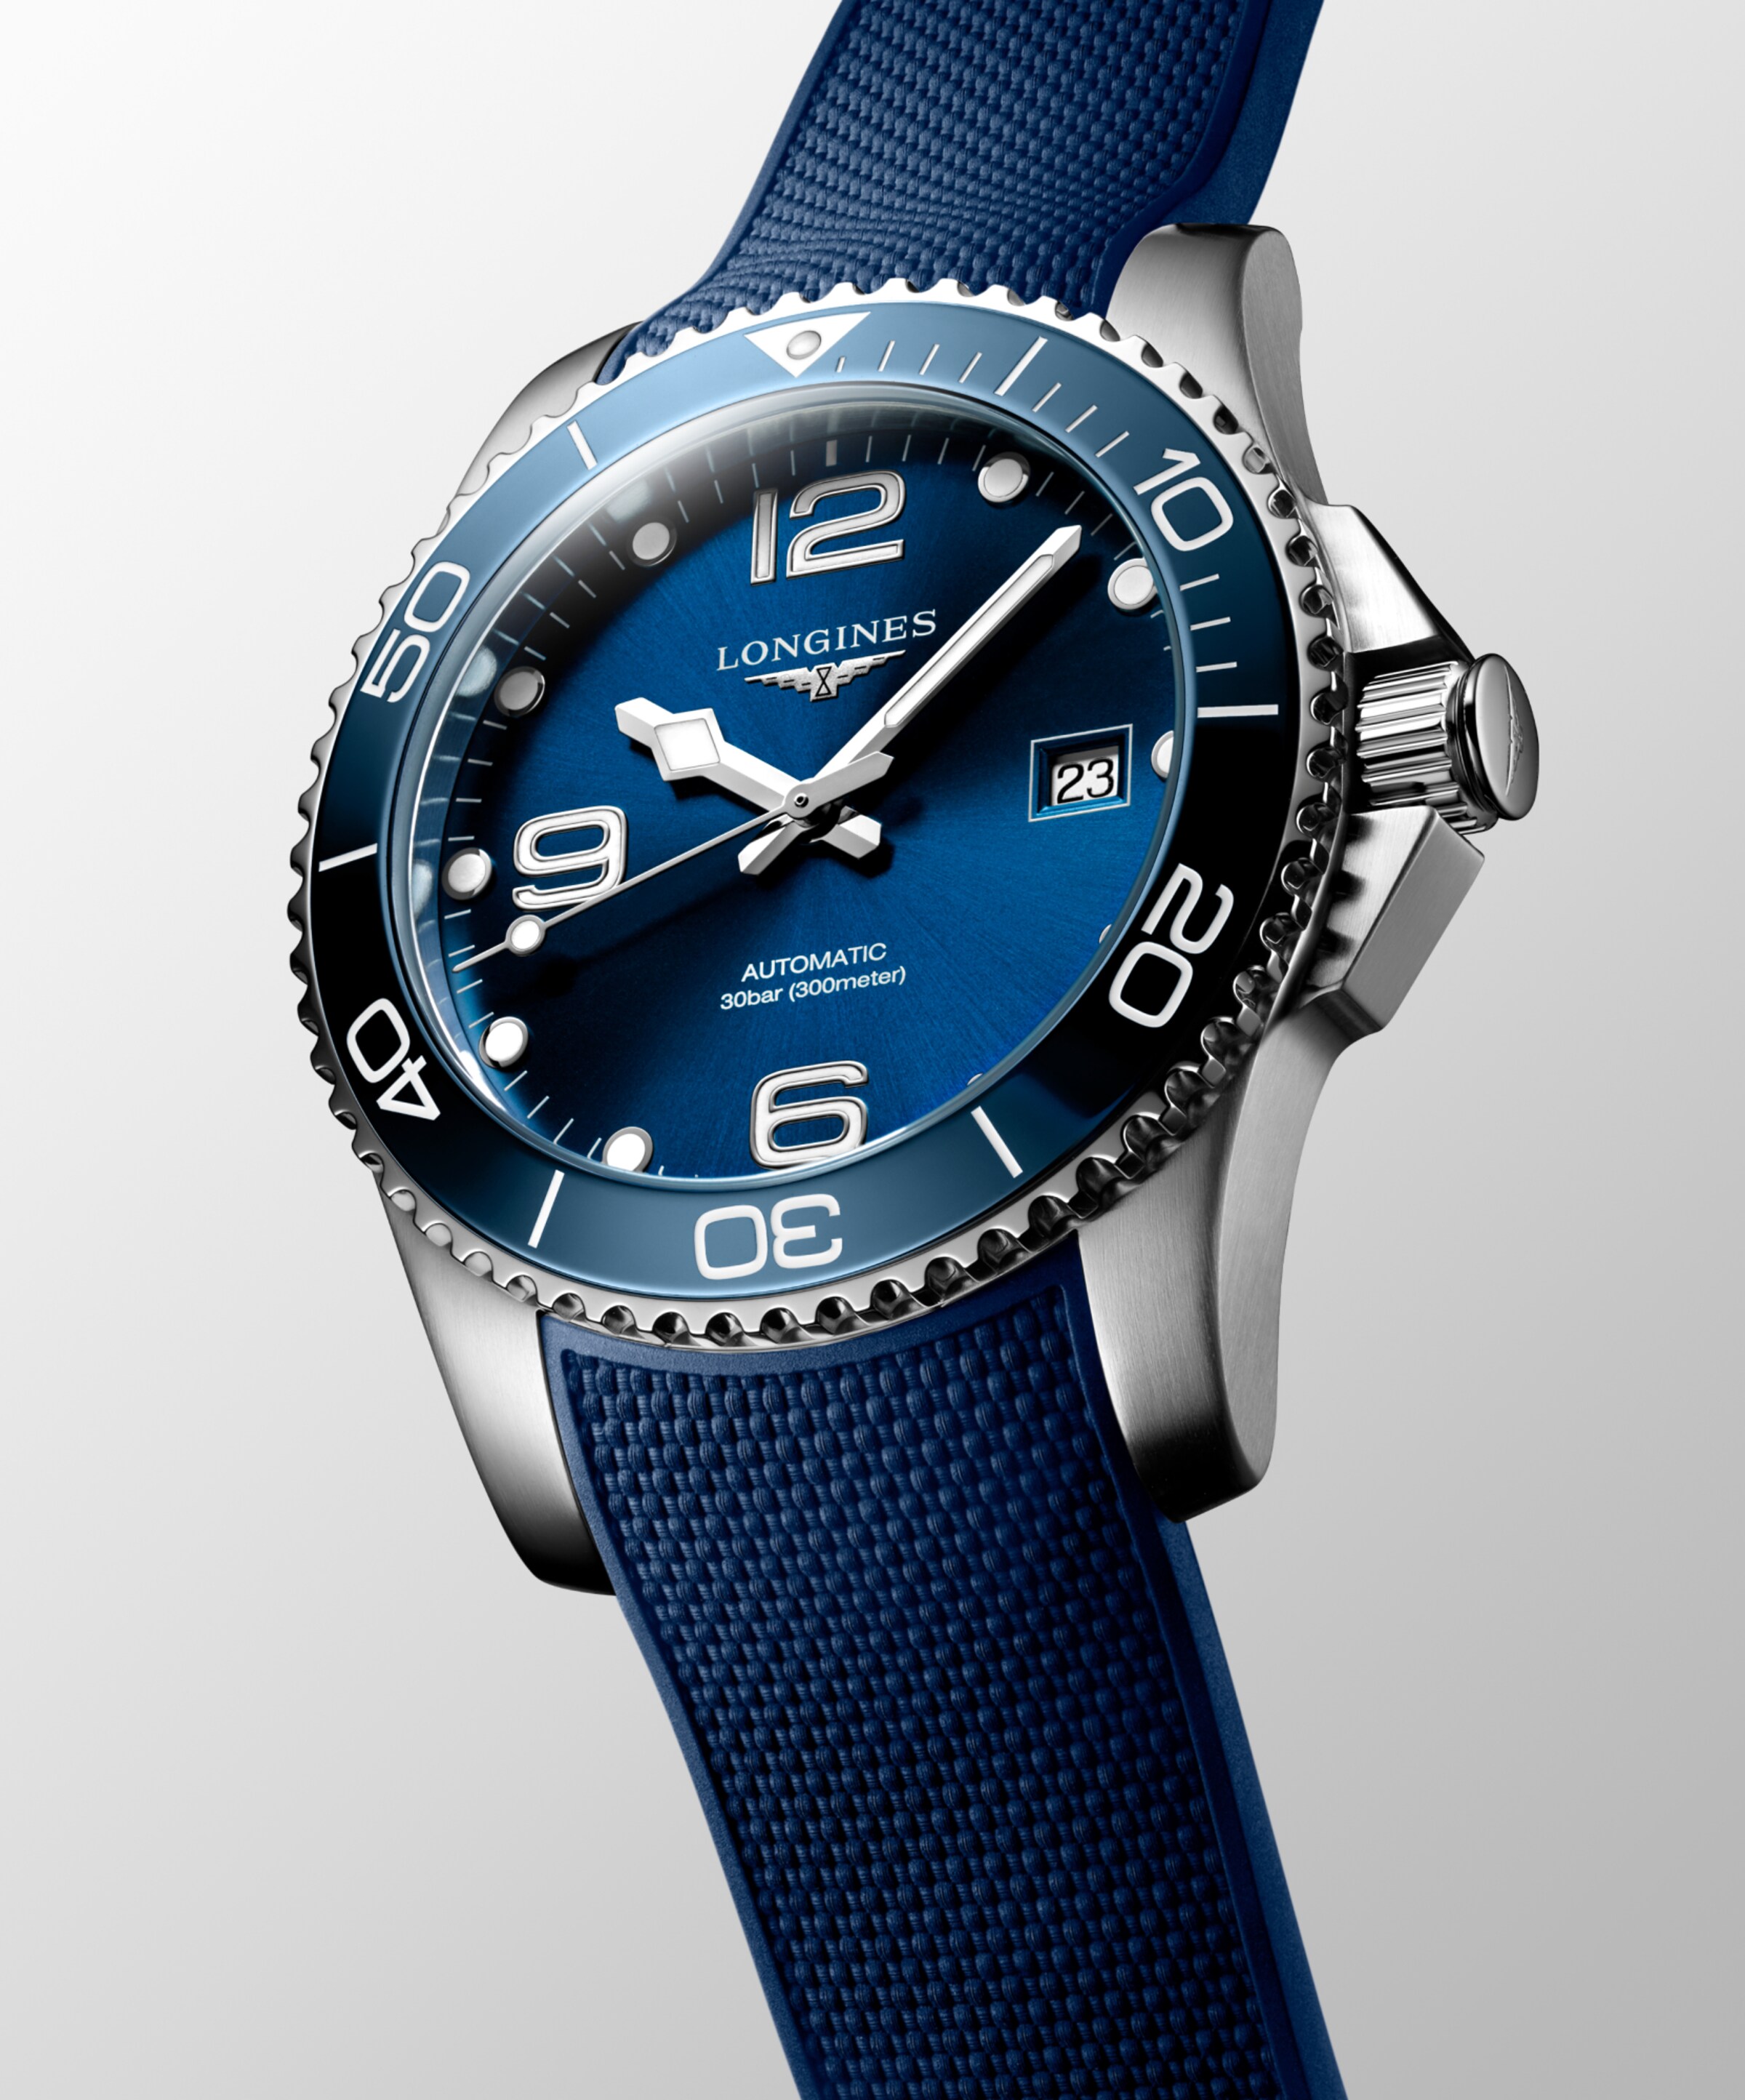 Longines HYDROCONQUEST Automatic Stainless steel and ceramic bezel Watch - L3.781.4.96.9